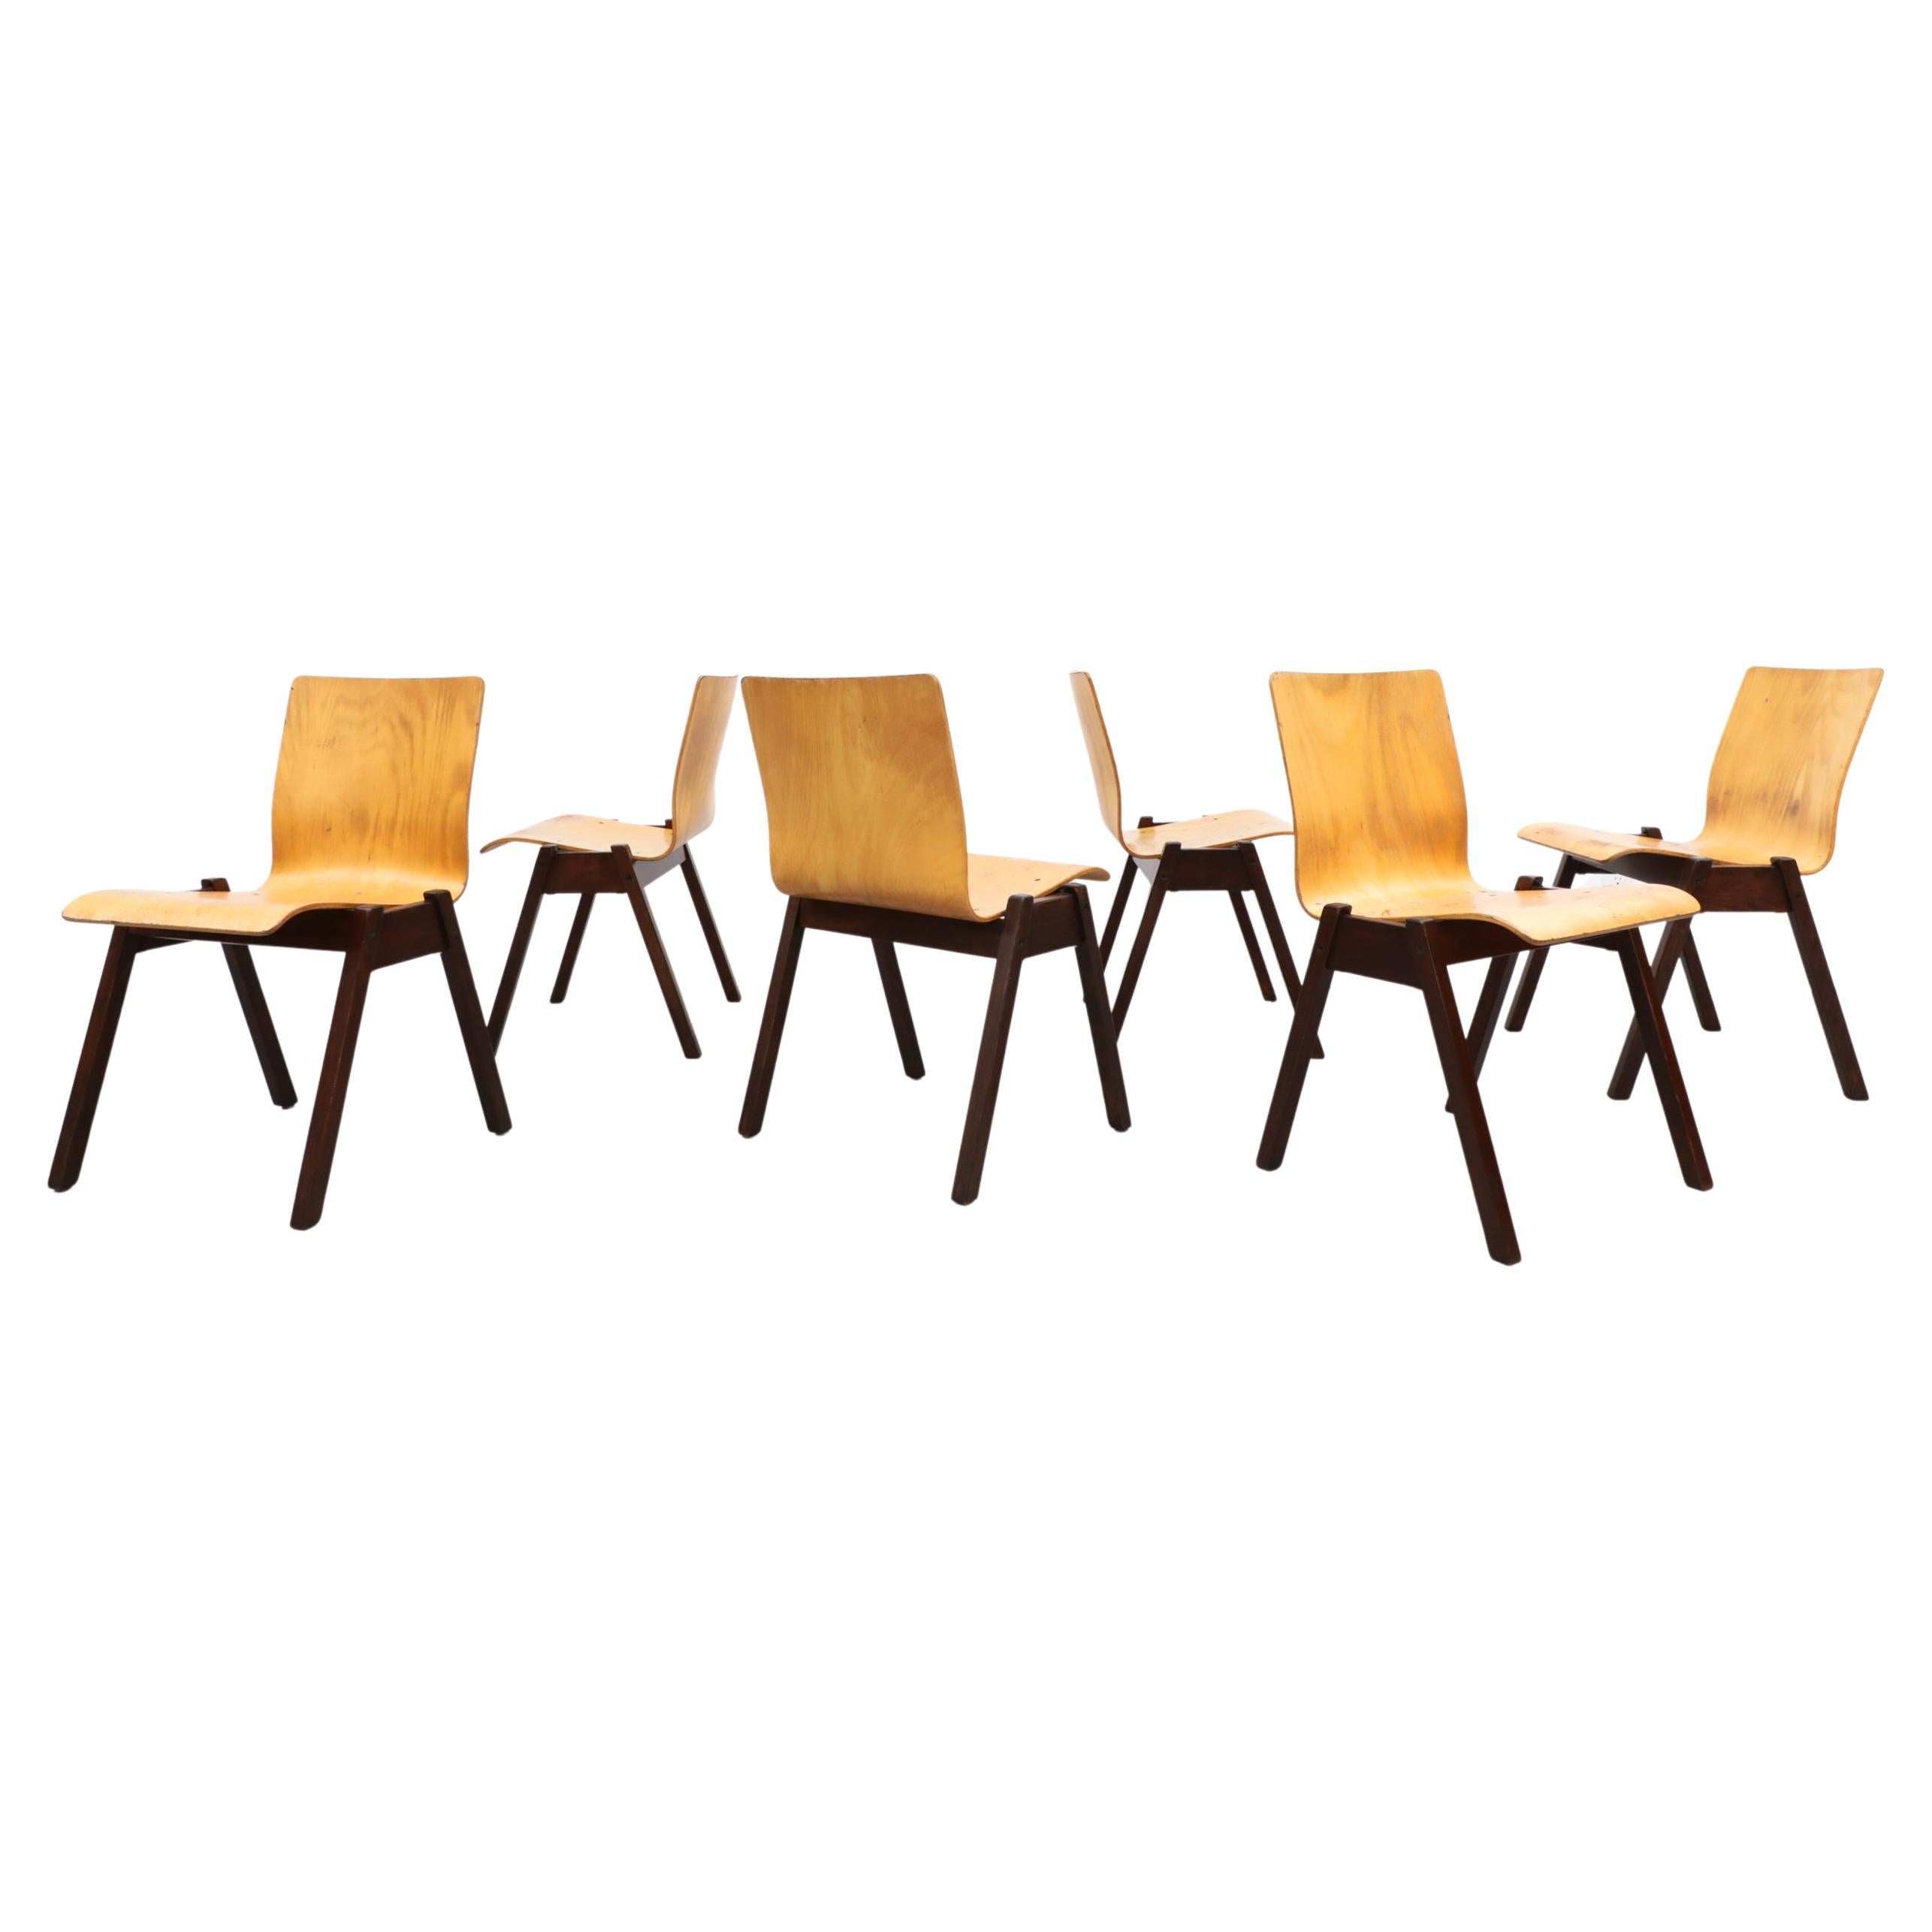 Roland Rainer Style Stacking Chairs Honey Beech & Dark Brown Stained Wood Legs